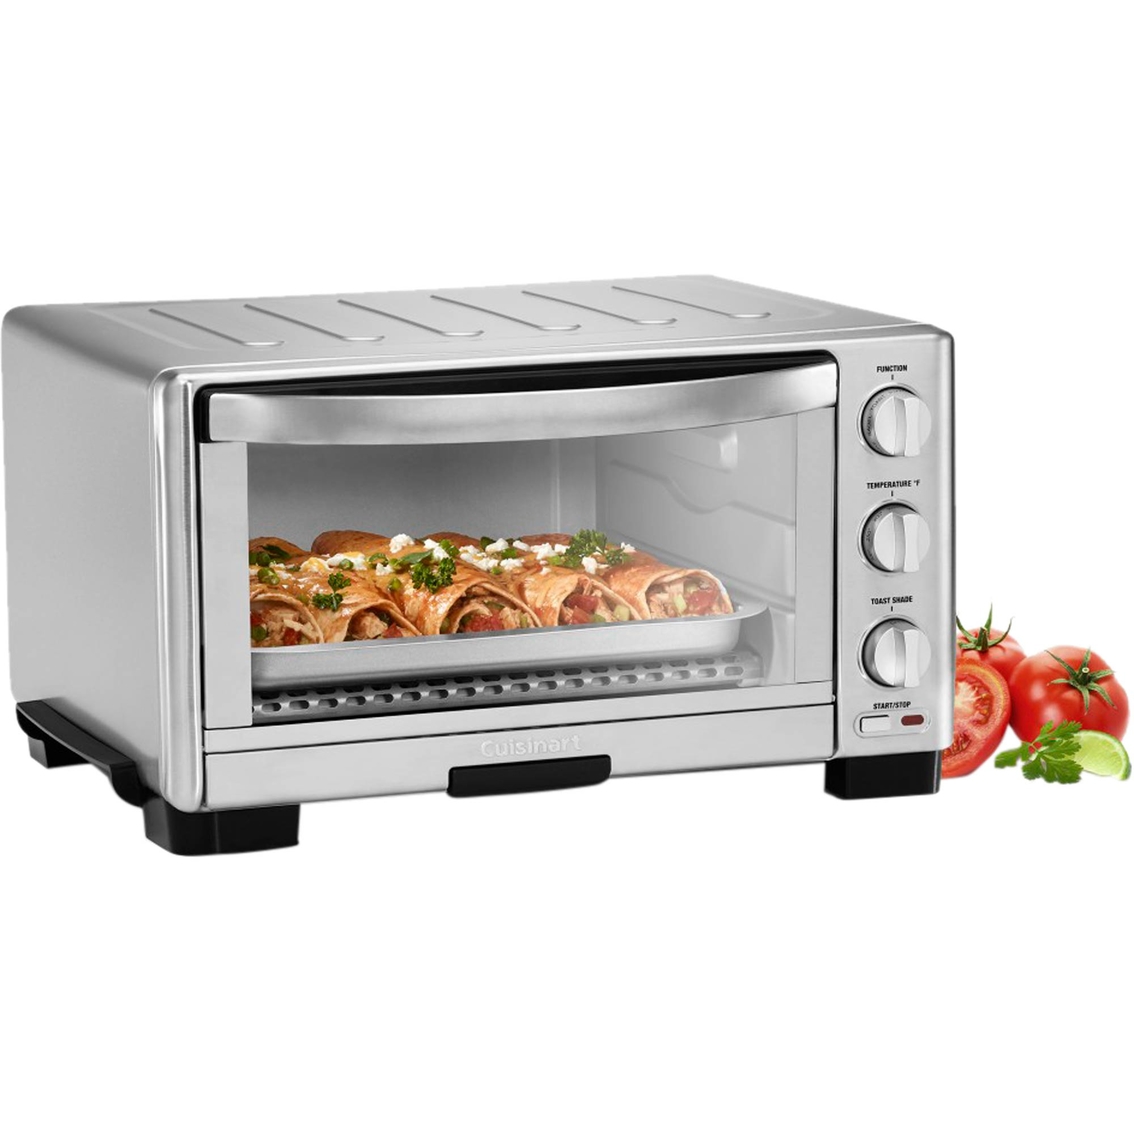 Toaster Oven Broiler - Image 4 of 5